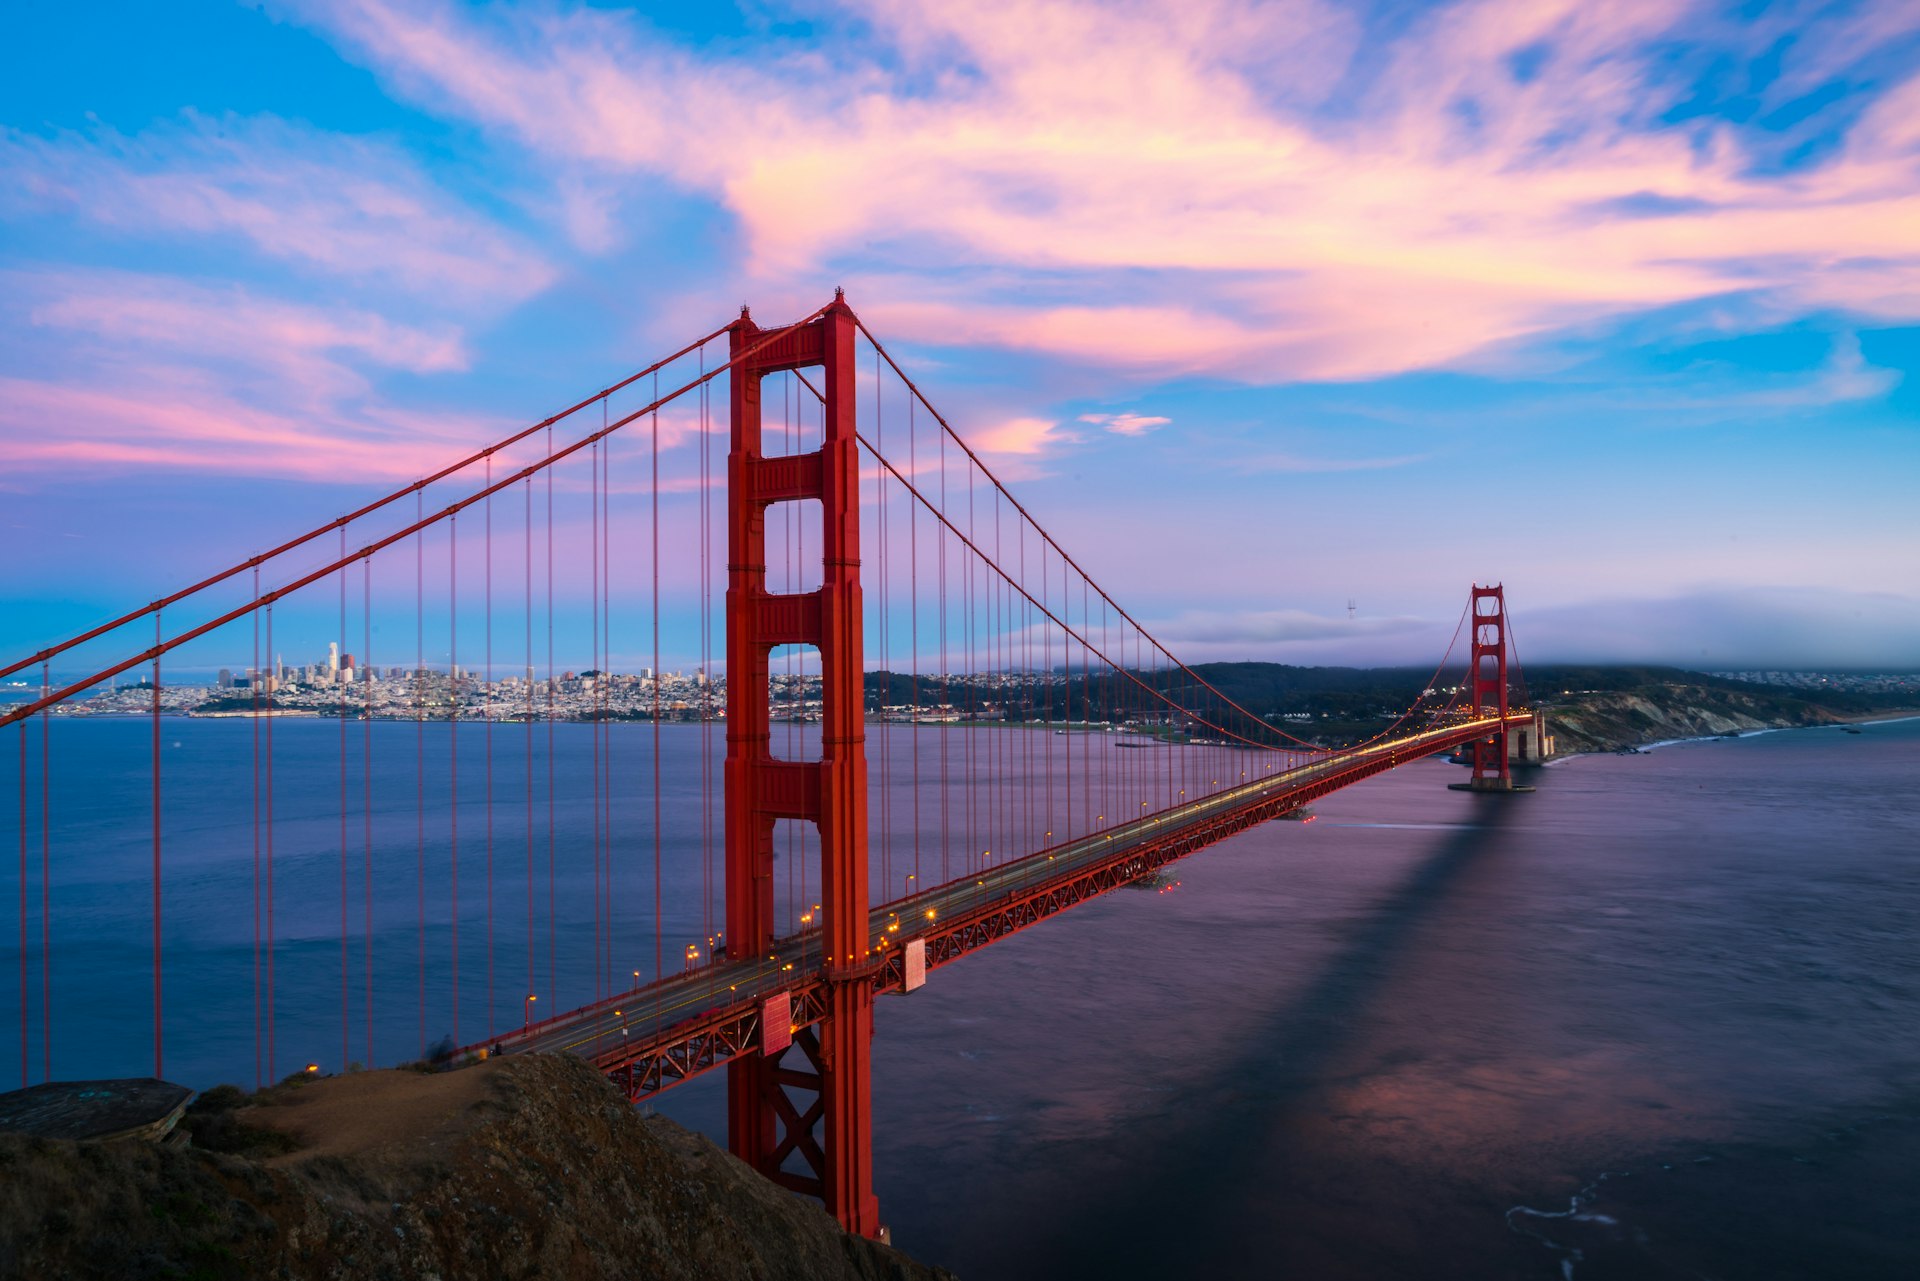 Pink clouds in the sky above the Golden Gate Bridge during sunrise